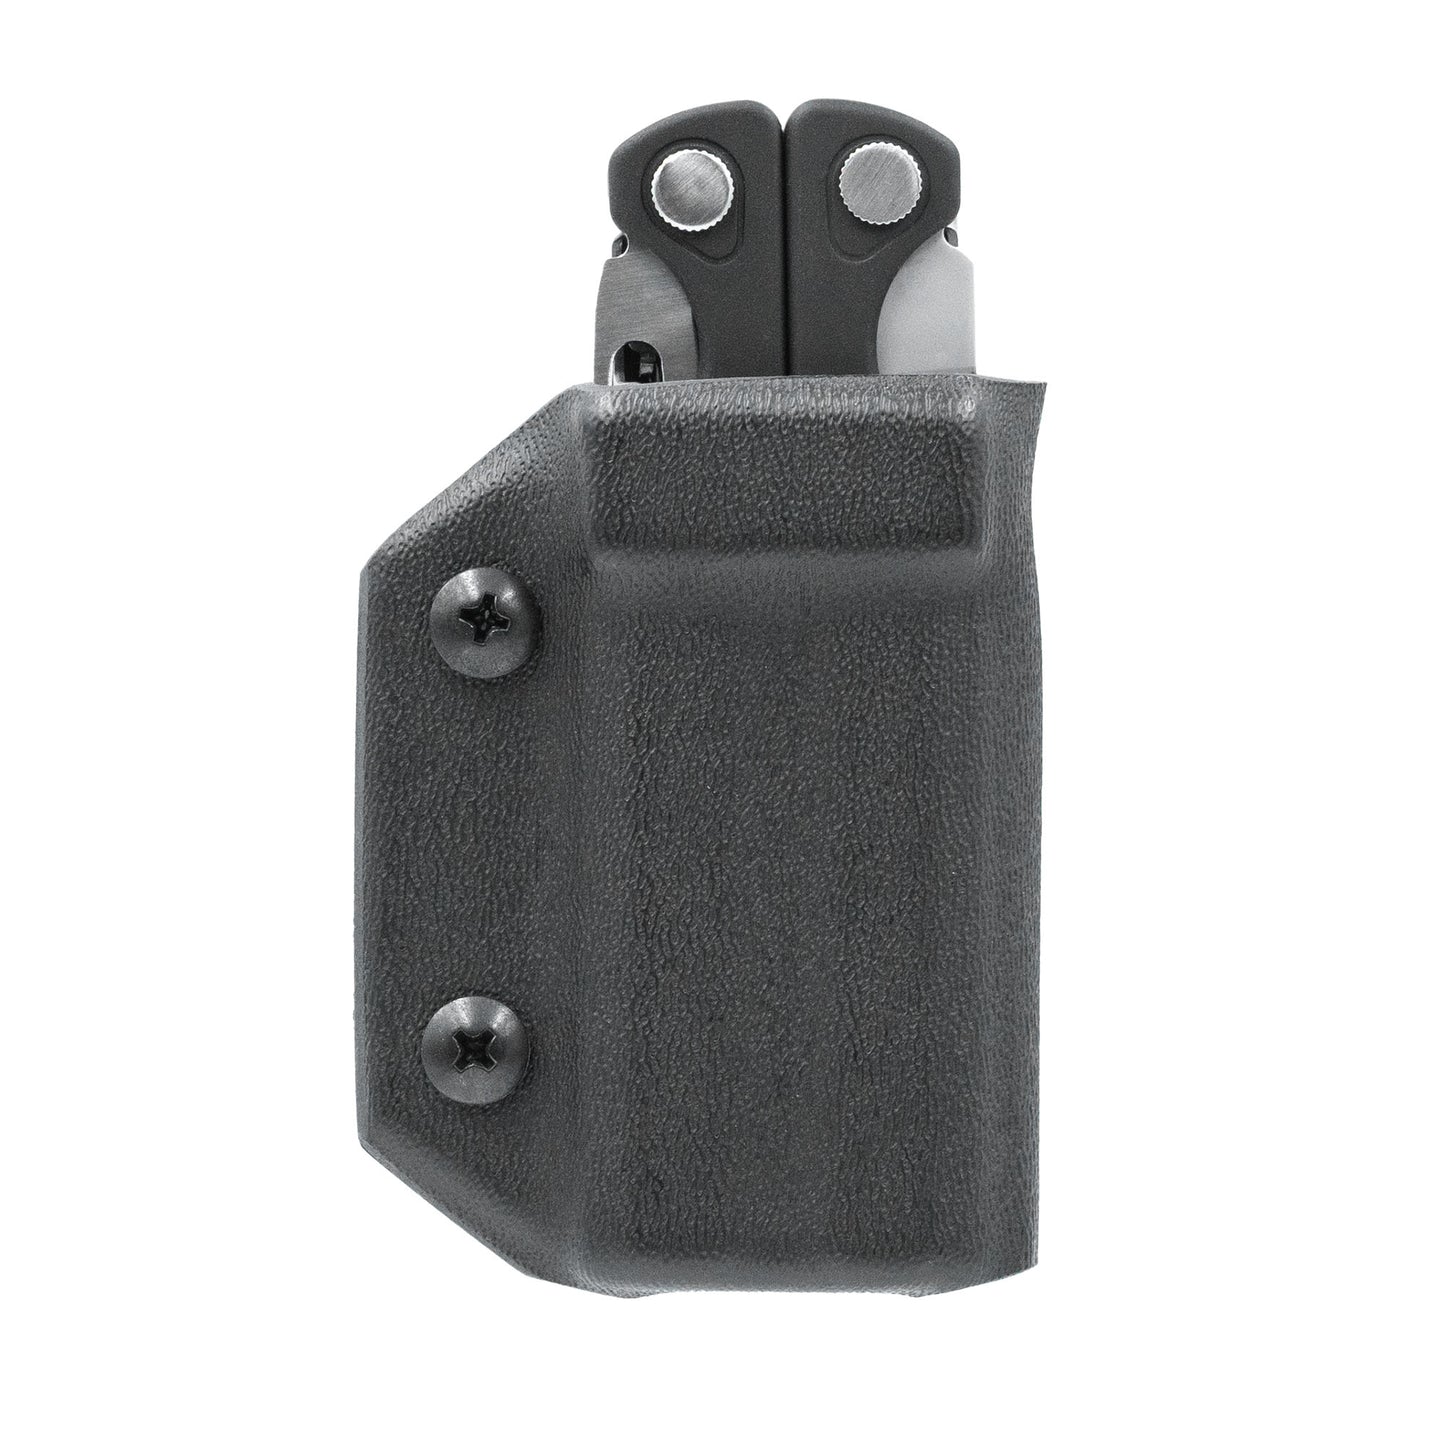 Kydex Sheath for Leatherman Charge & Charge + Clip & Carry